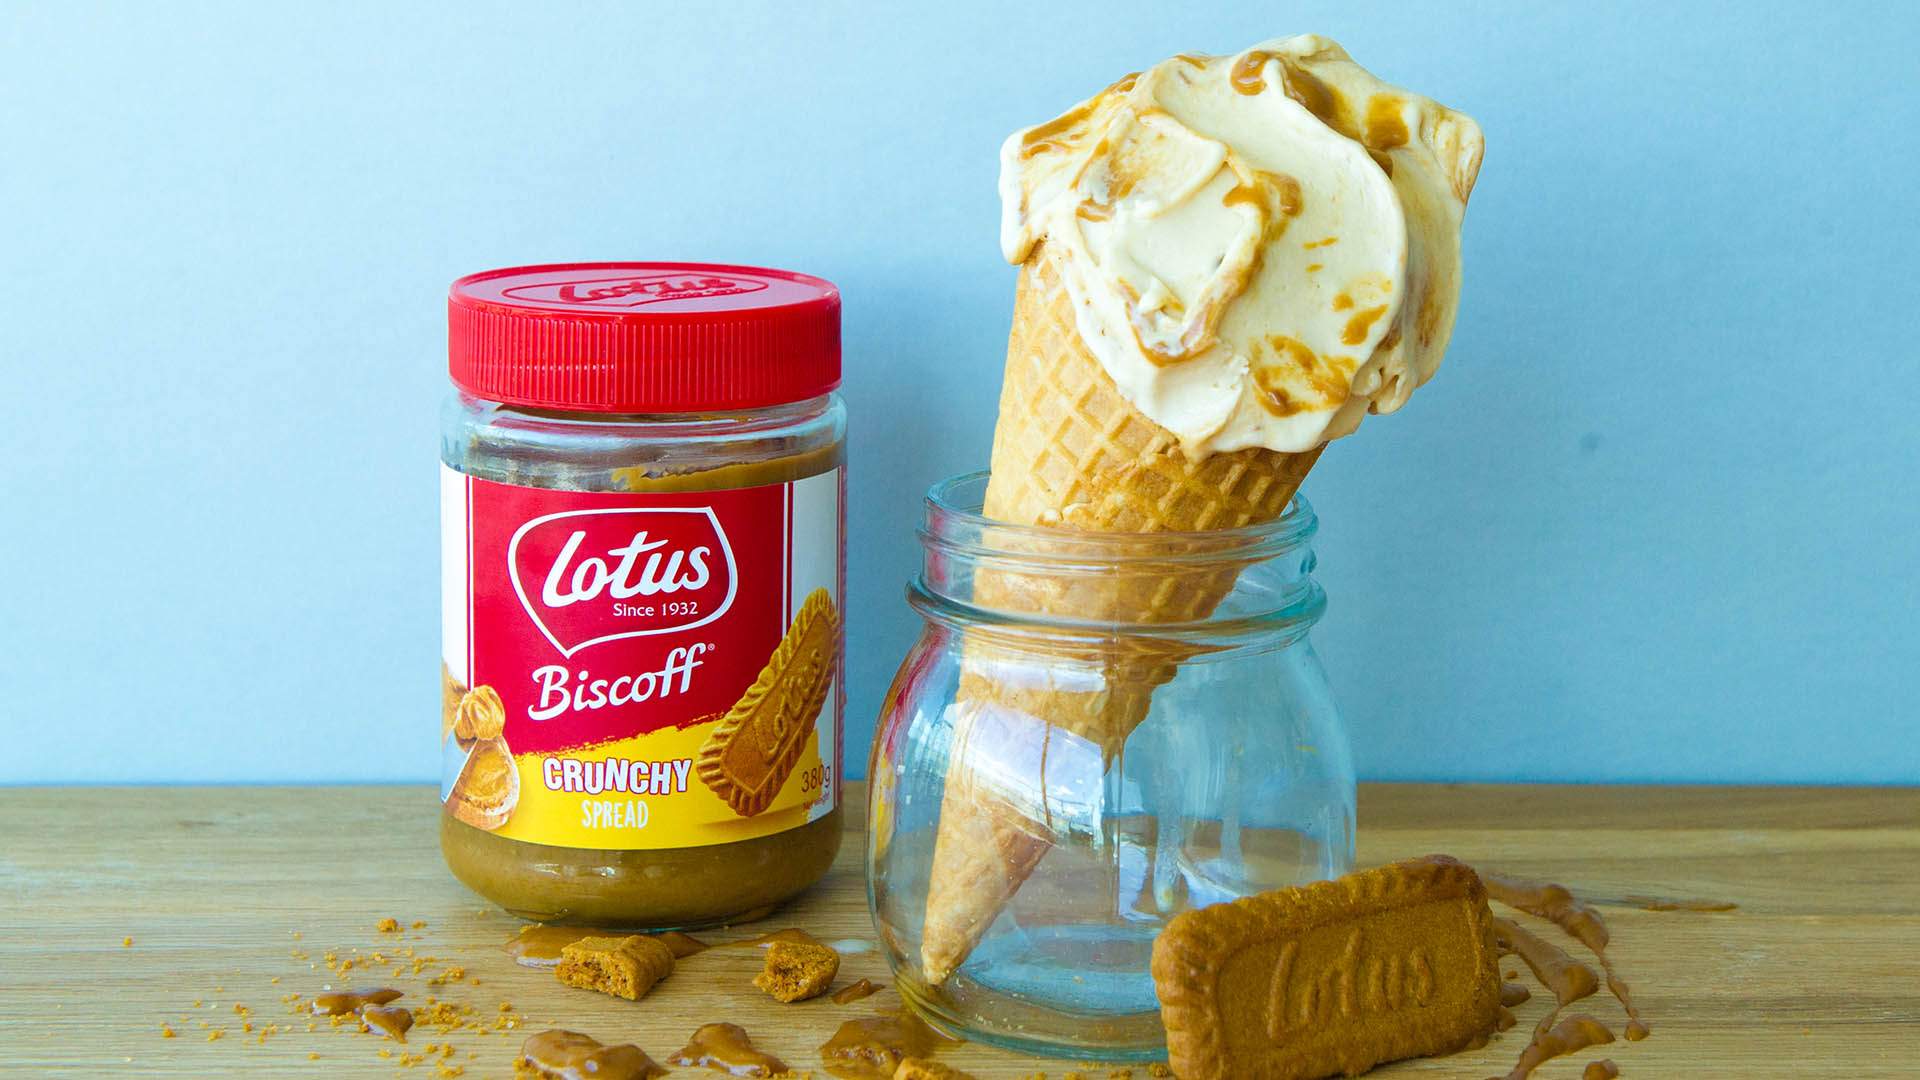 Gelatissimo Is Scooping Up Biscoff Gelato Complete with Biscuit Pieces Just for This Month